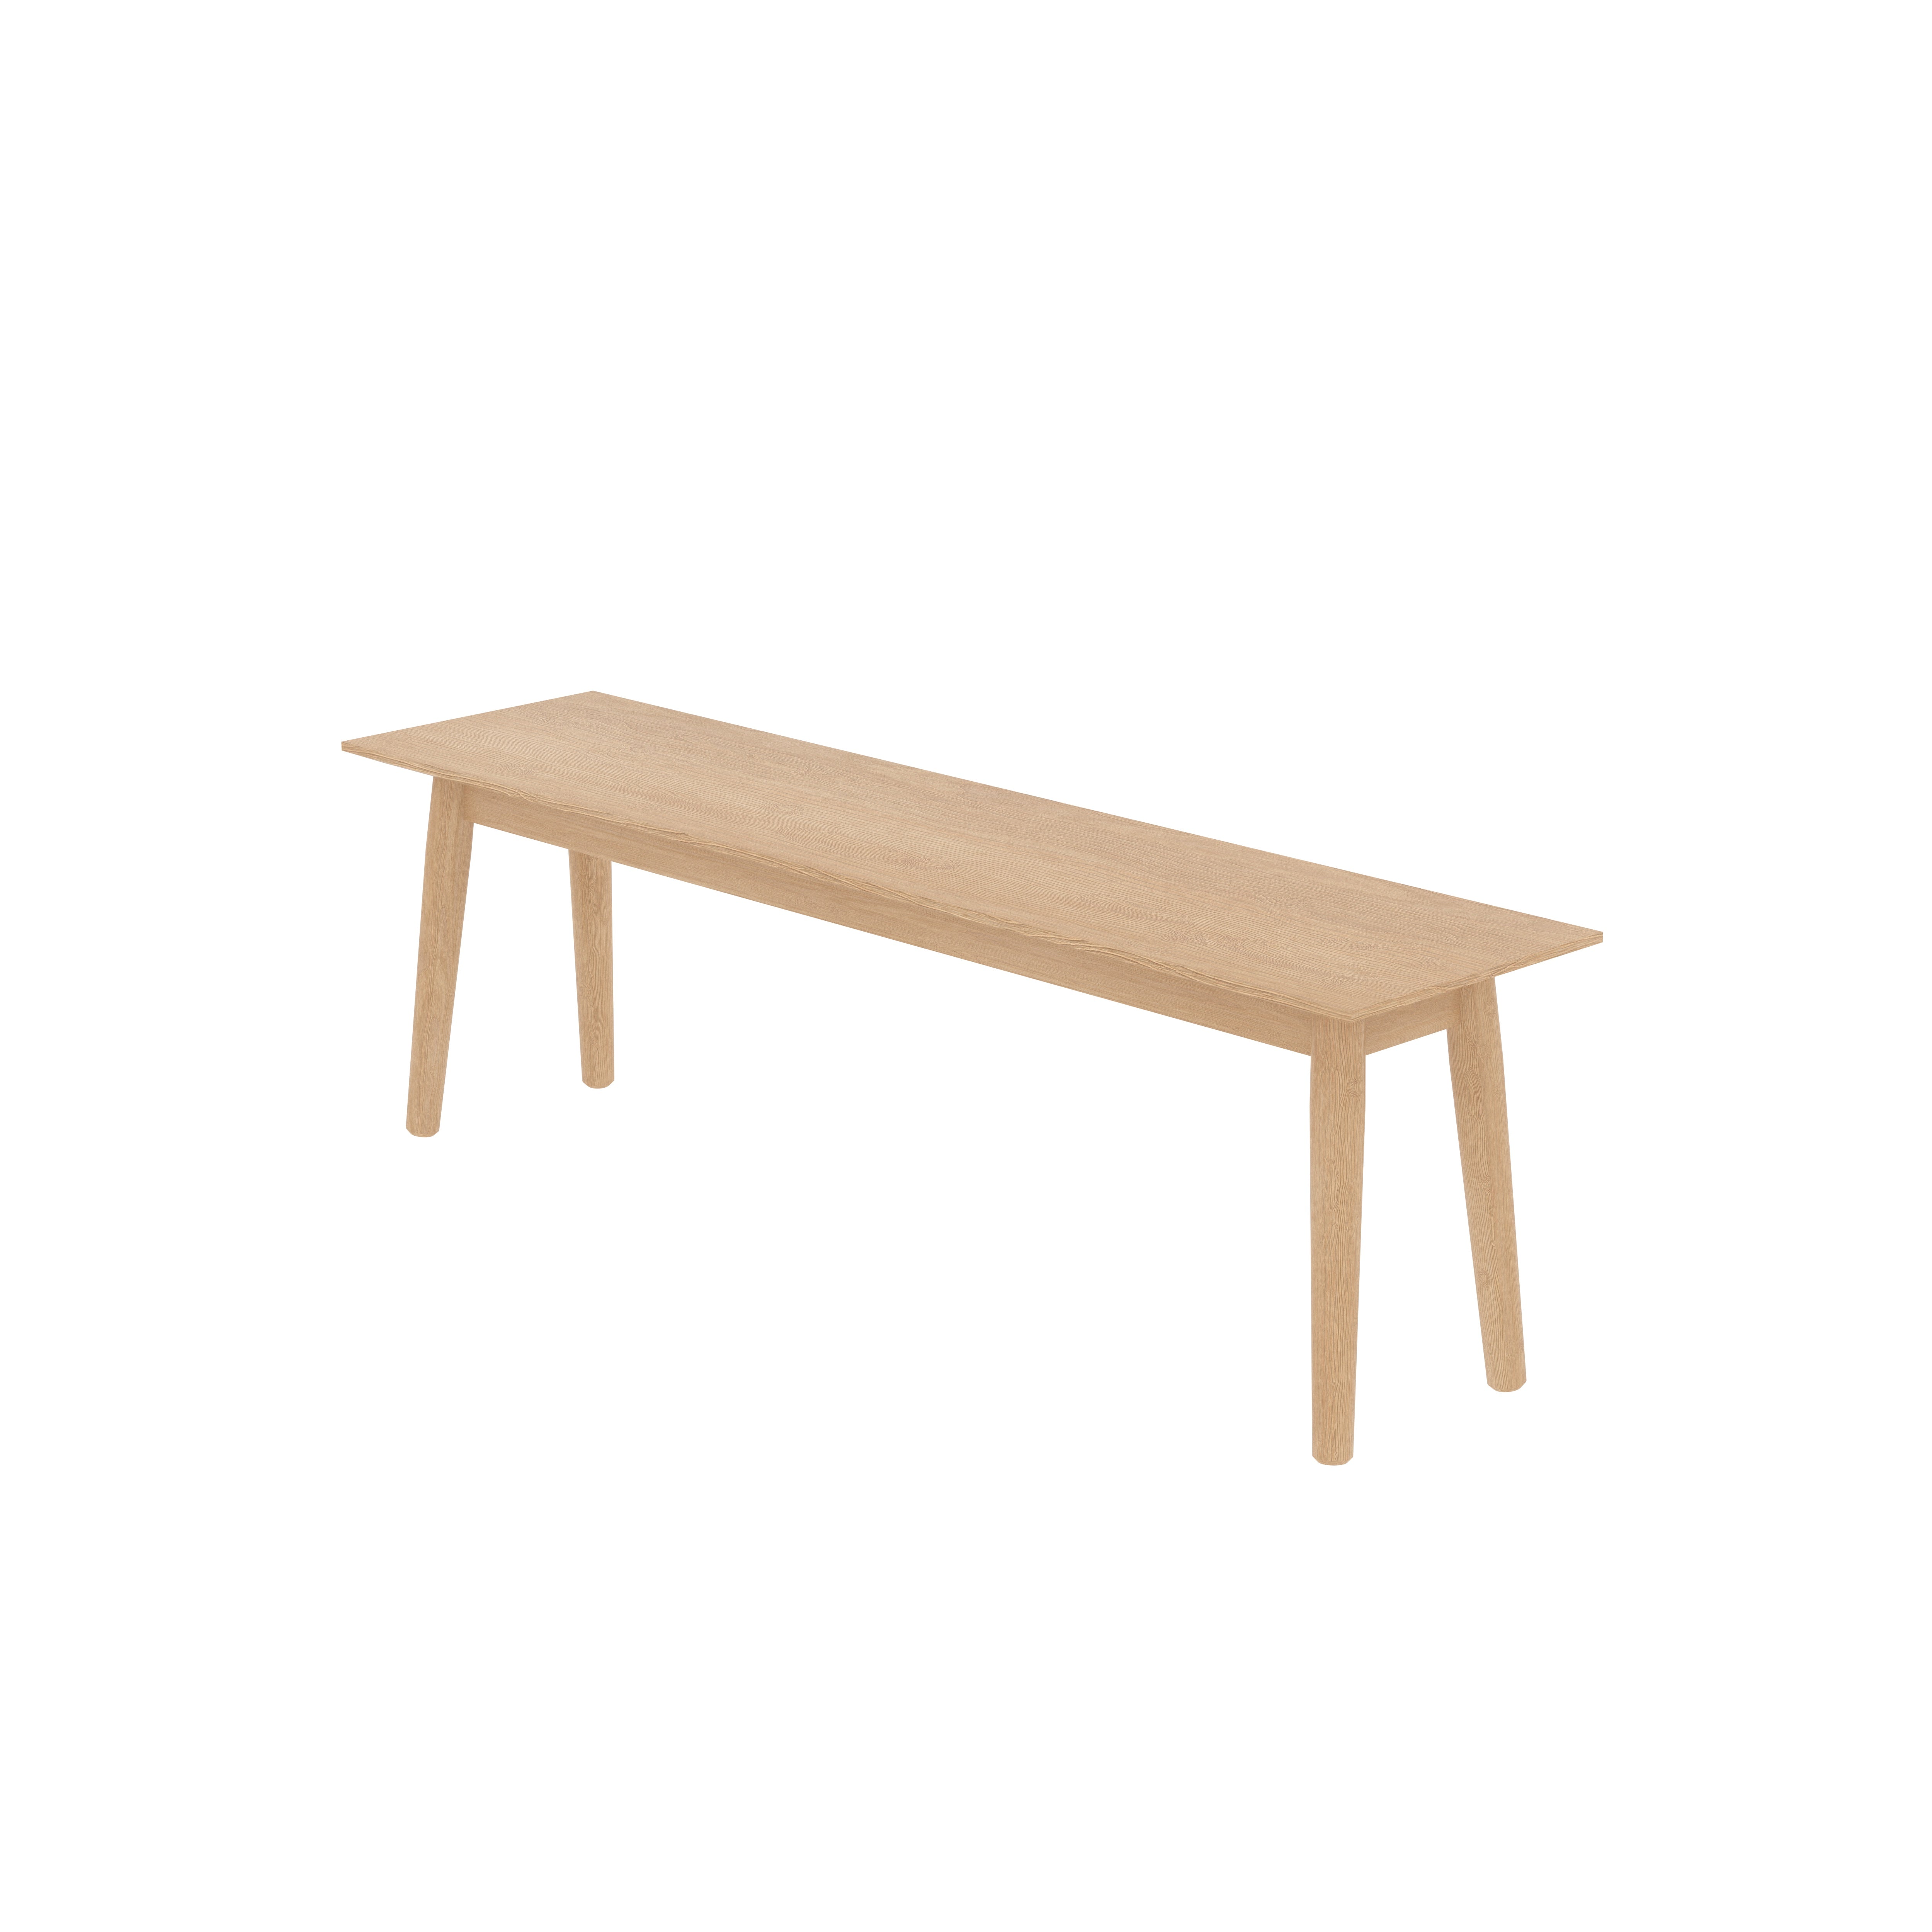 Small Sitting Bench Made of Oak Wood Bench